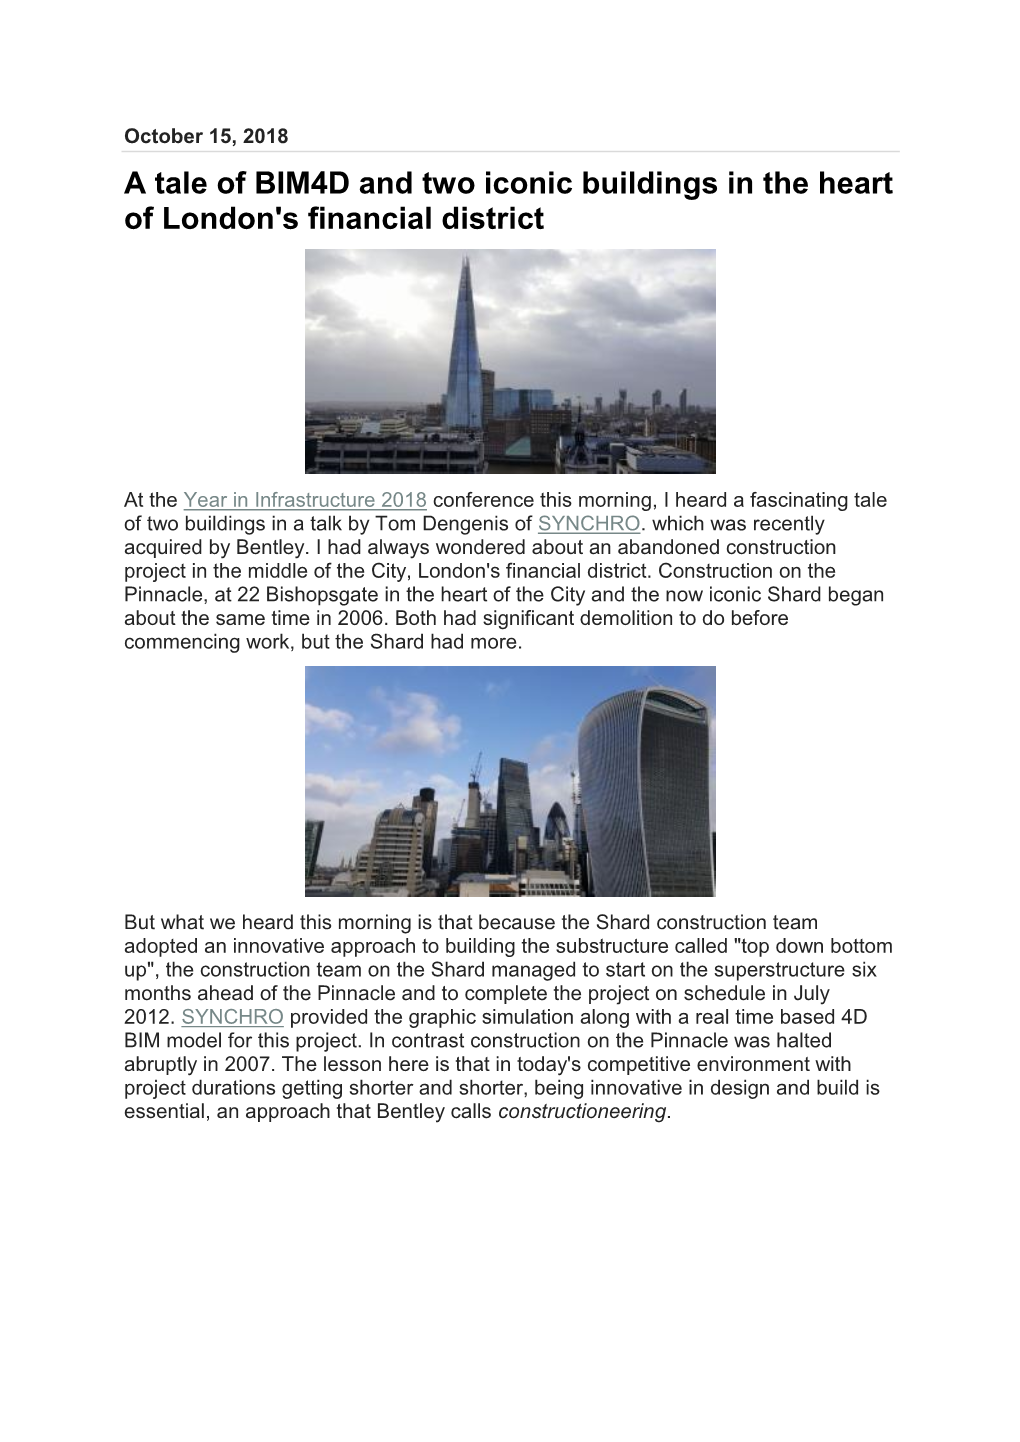 A Tale of BIM4D and Two Iconic Buildings in the Heart of London's Financial District